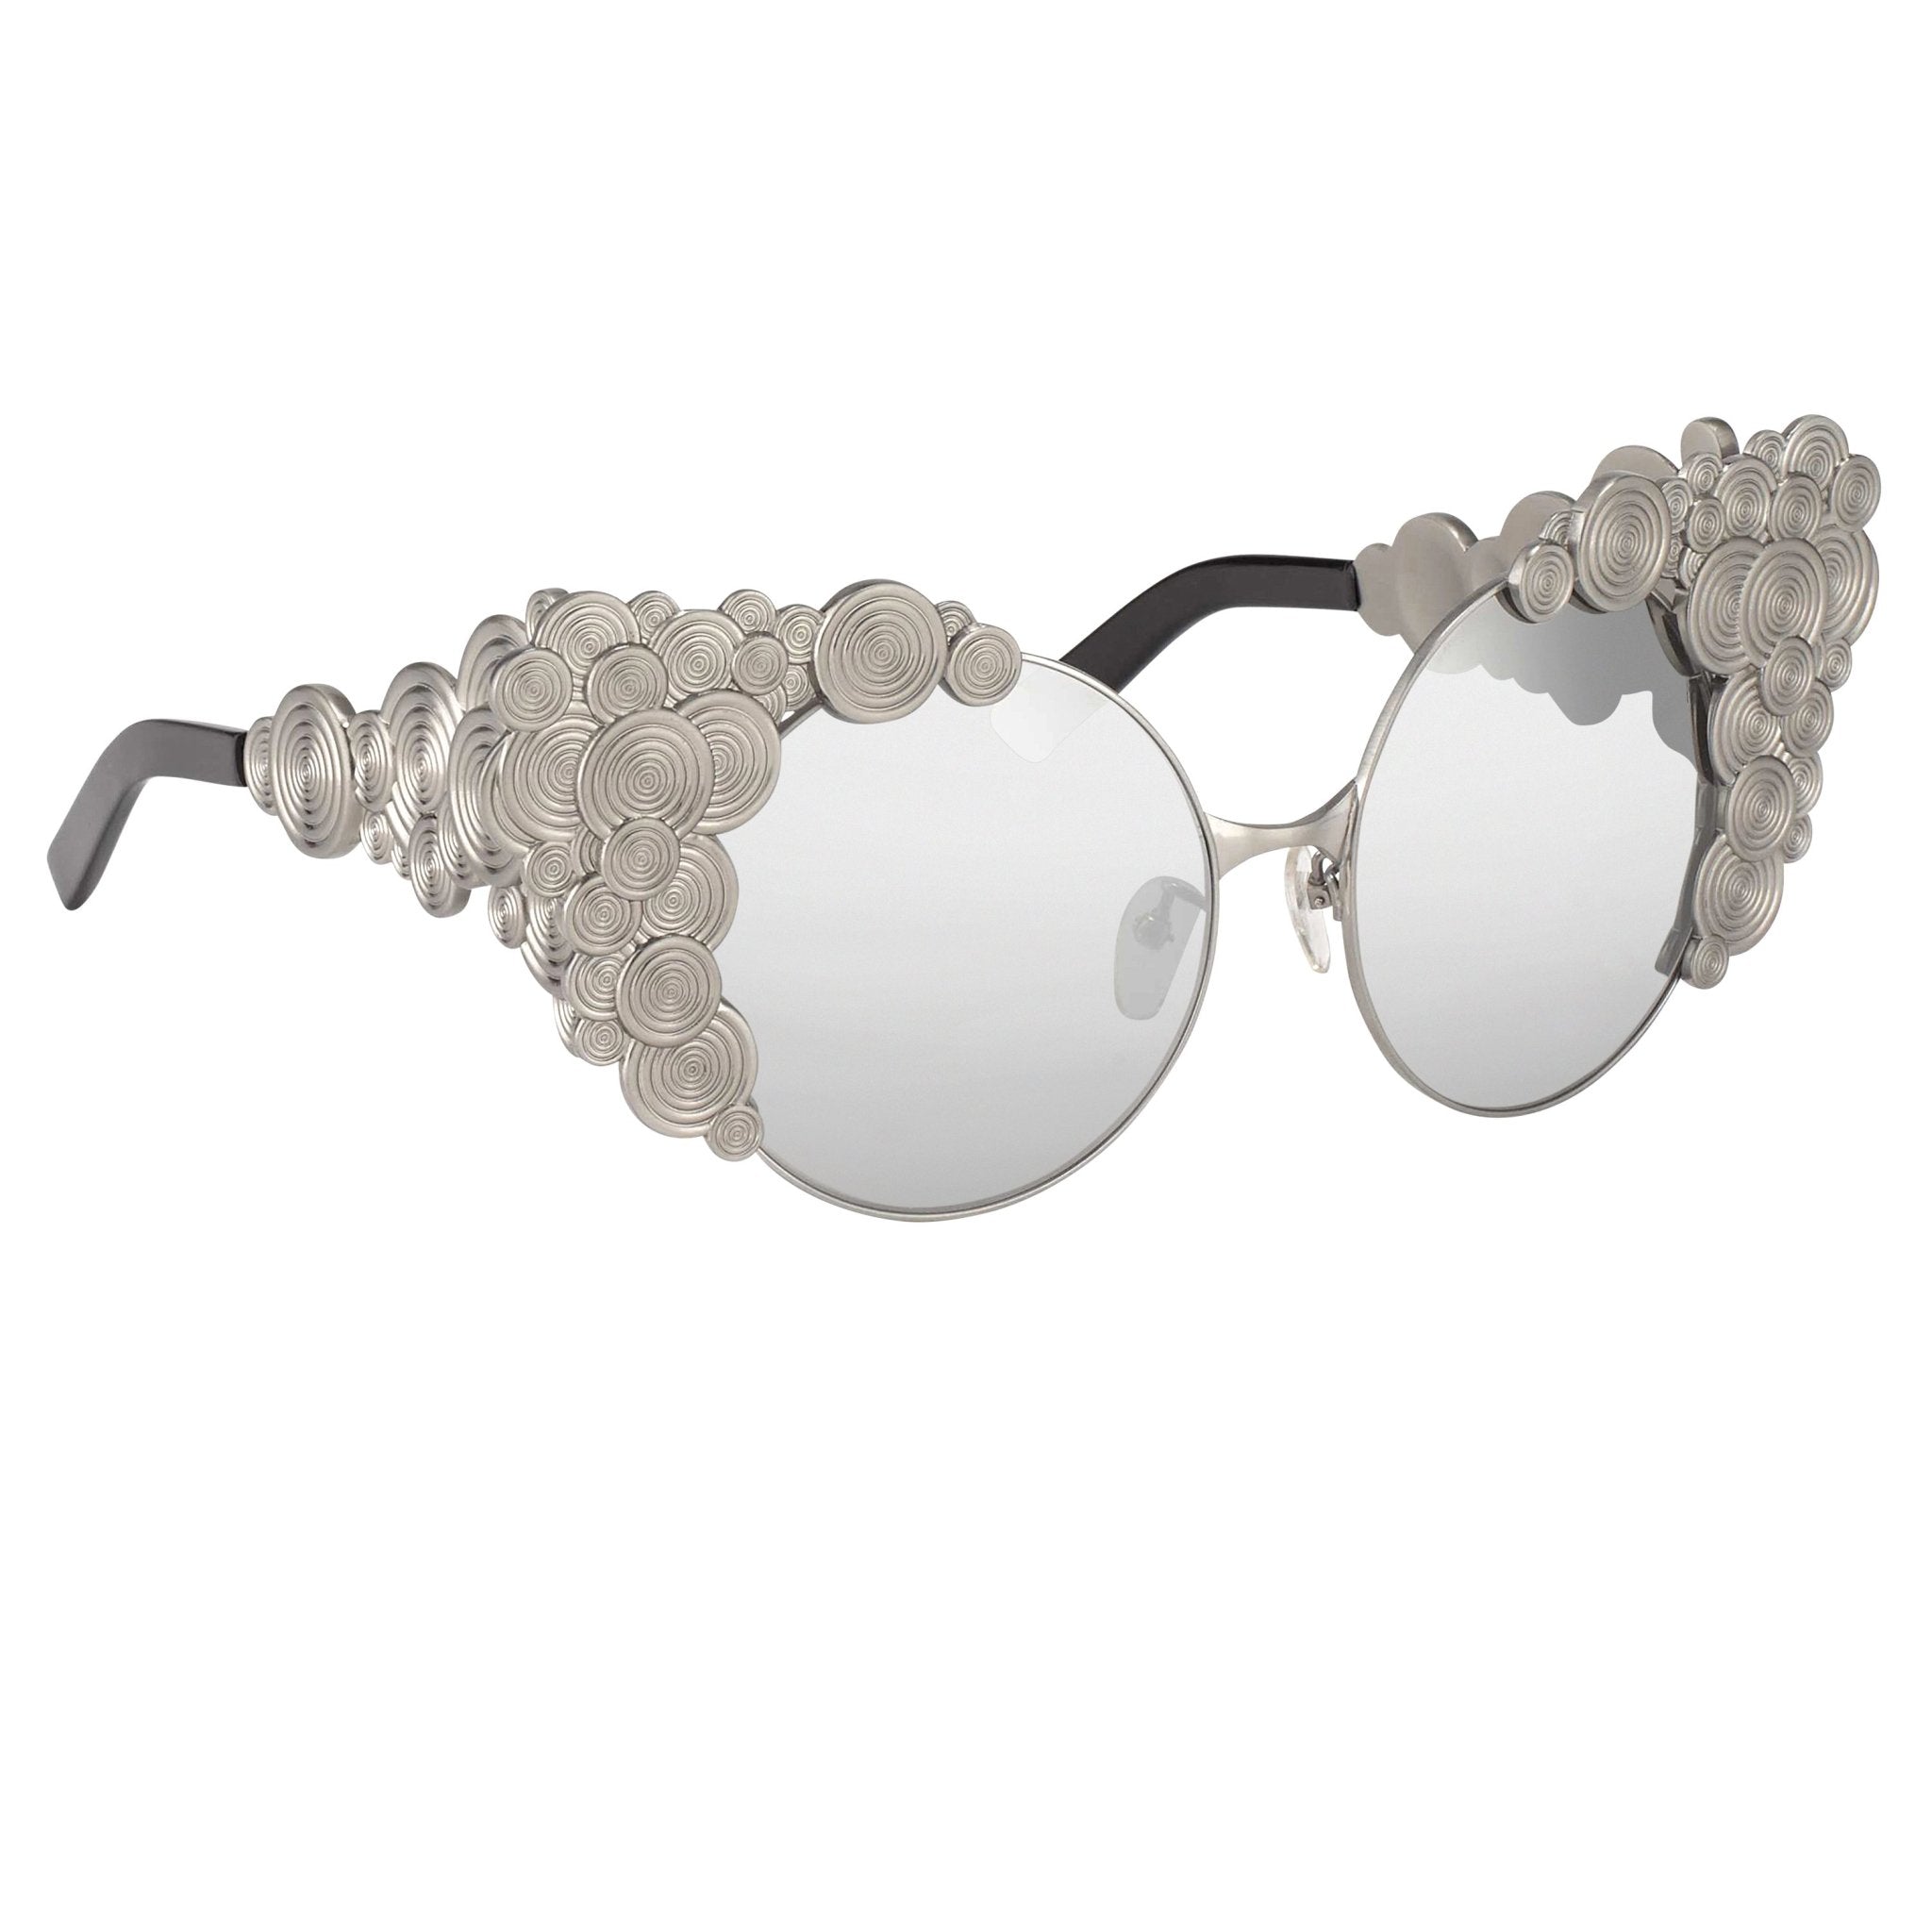 Khaleda And Fahad Women Sunglasses Cat Eyes Silver Titanium With Platinum Lenses Category 3 KR2C2SUN - Watches & Crystals